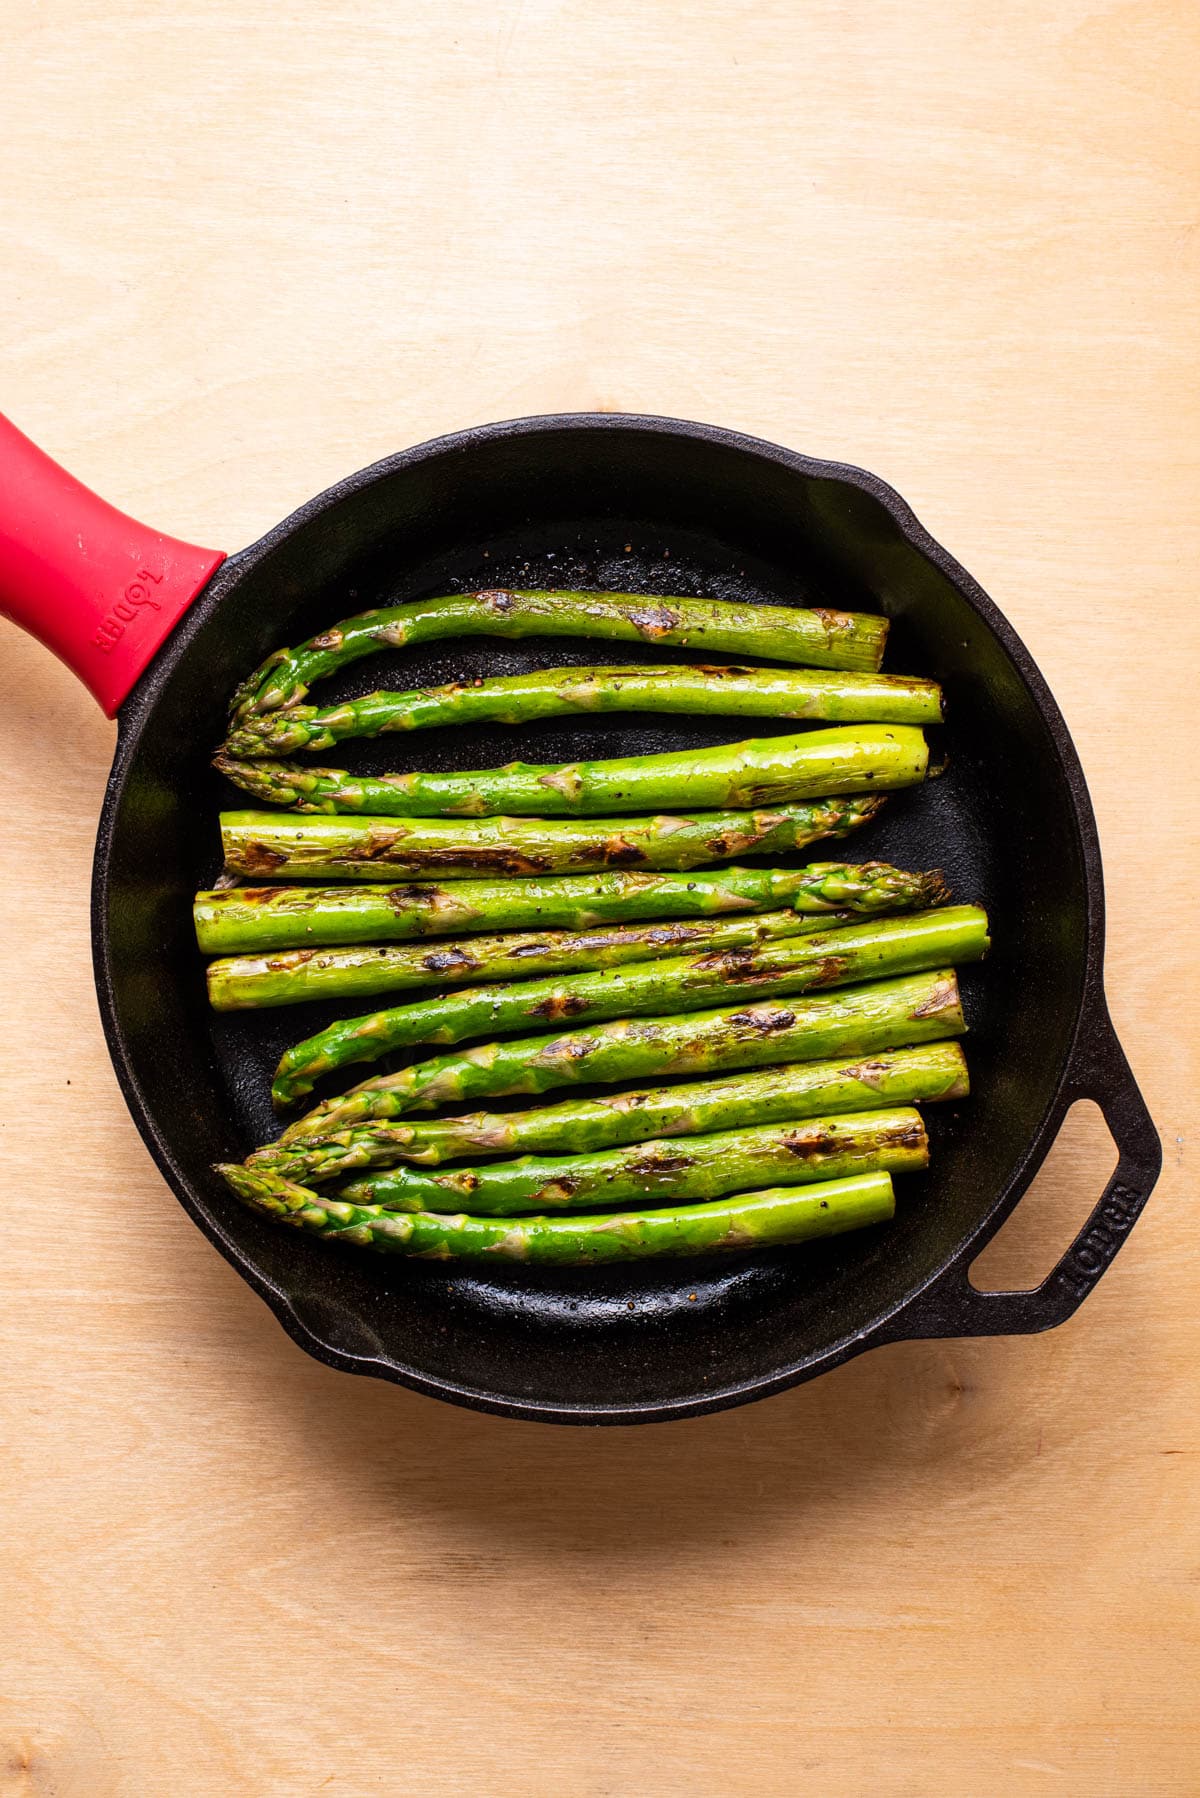 Seared asparagus in a cast iron skillet.